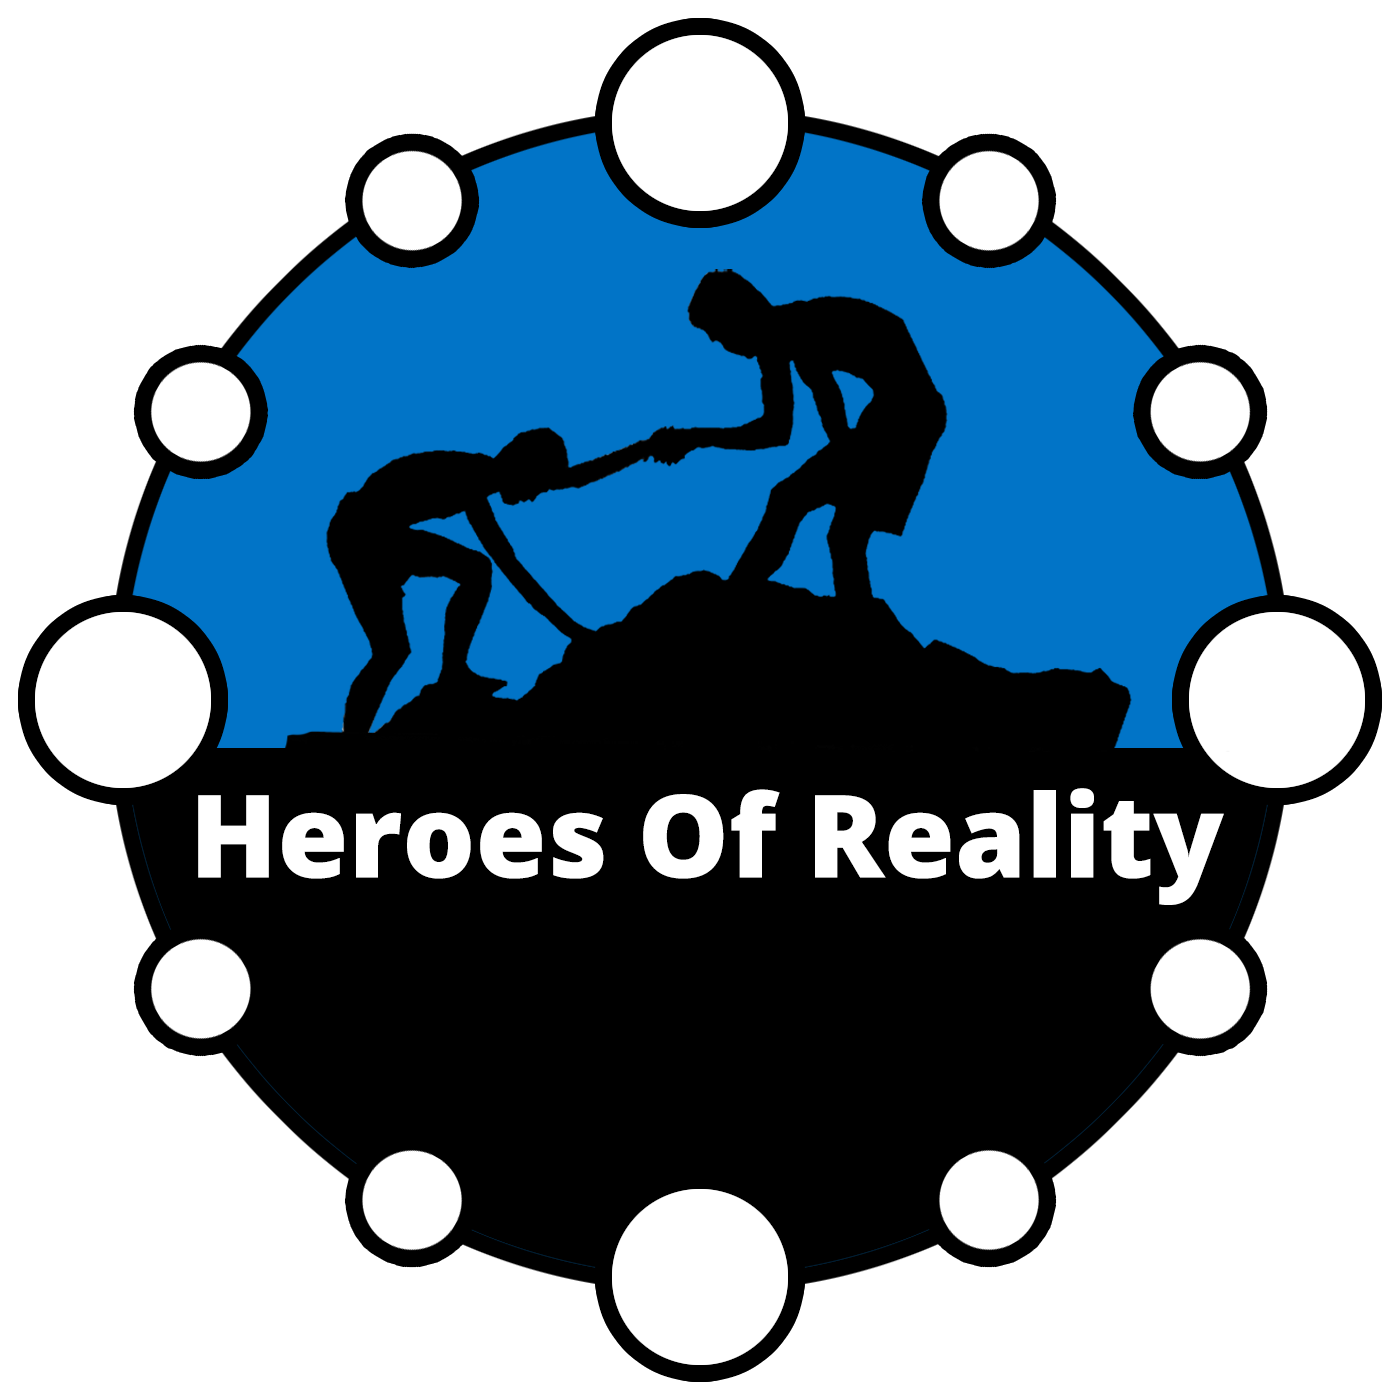 Heroes of Reality